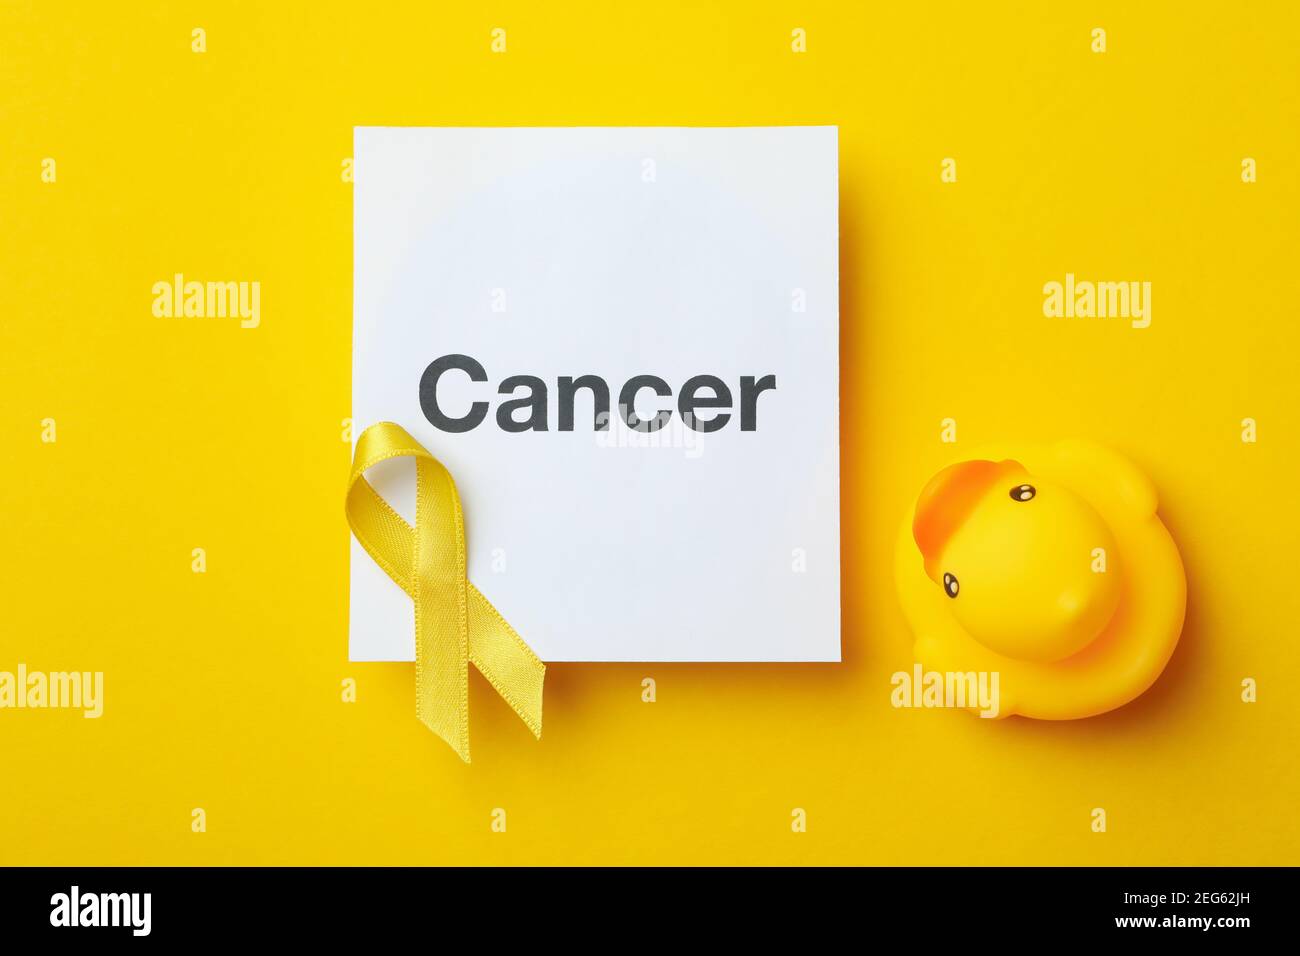 Text cancer, awareness ribbon and rubber duck on yellow background Stock Photo